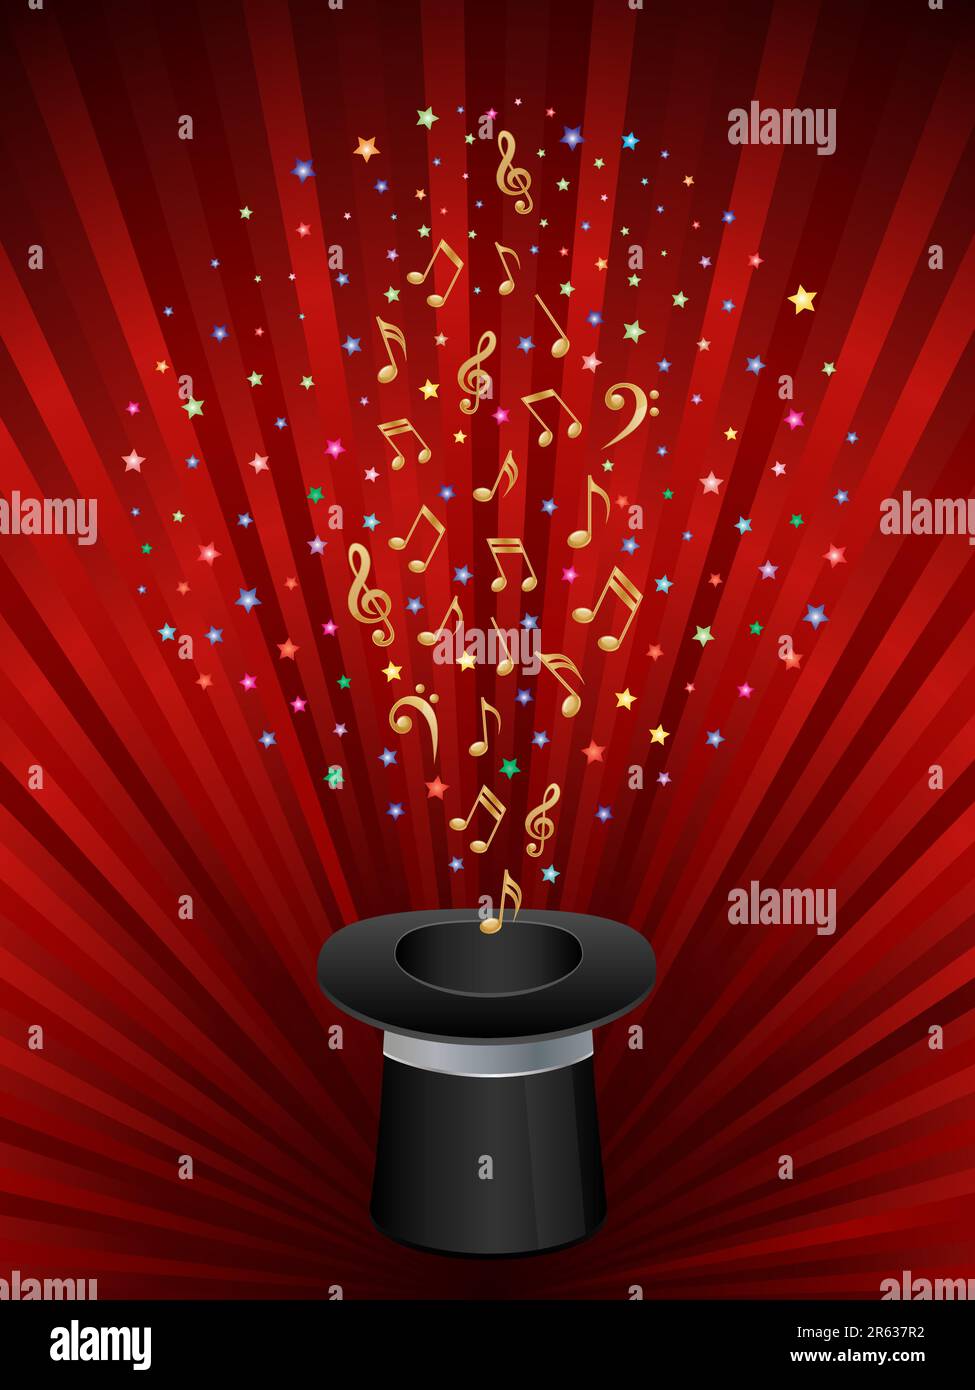 Music background with a magic top hat. Stock Vector